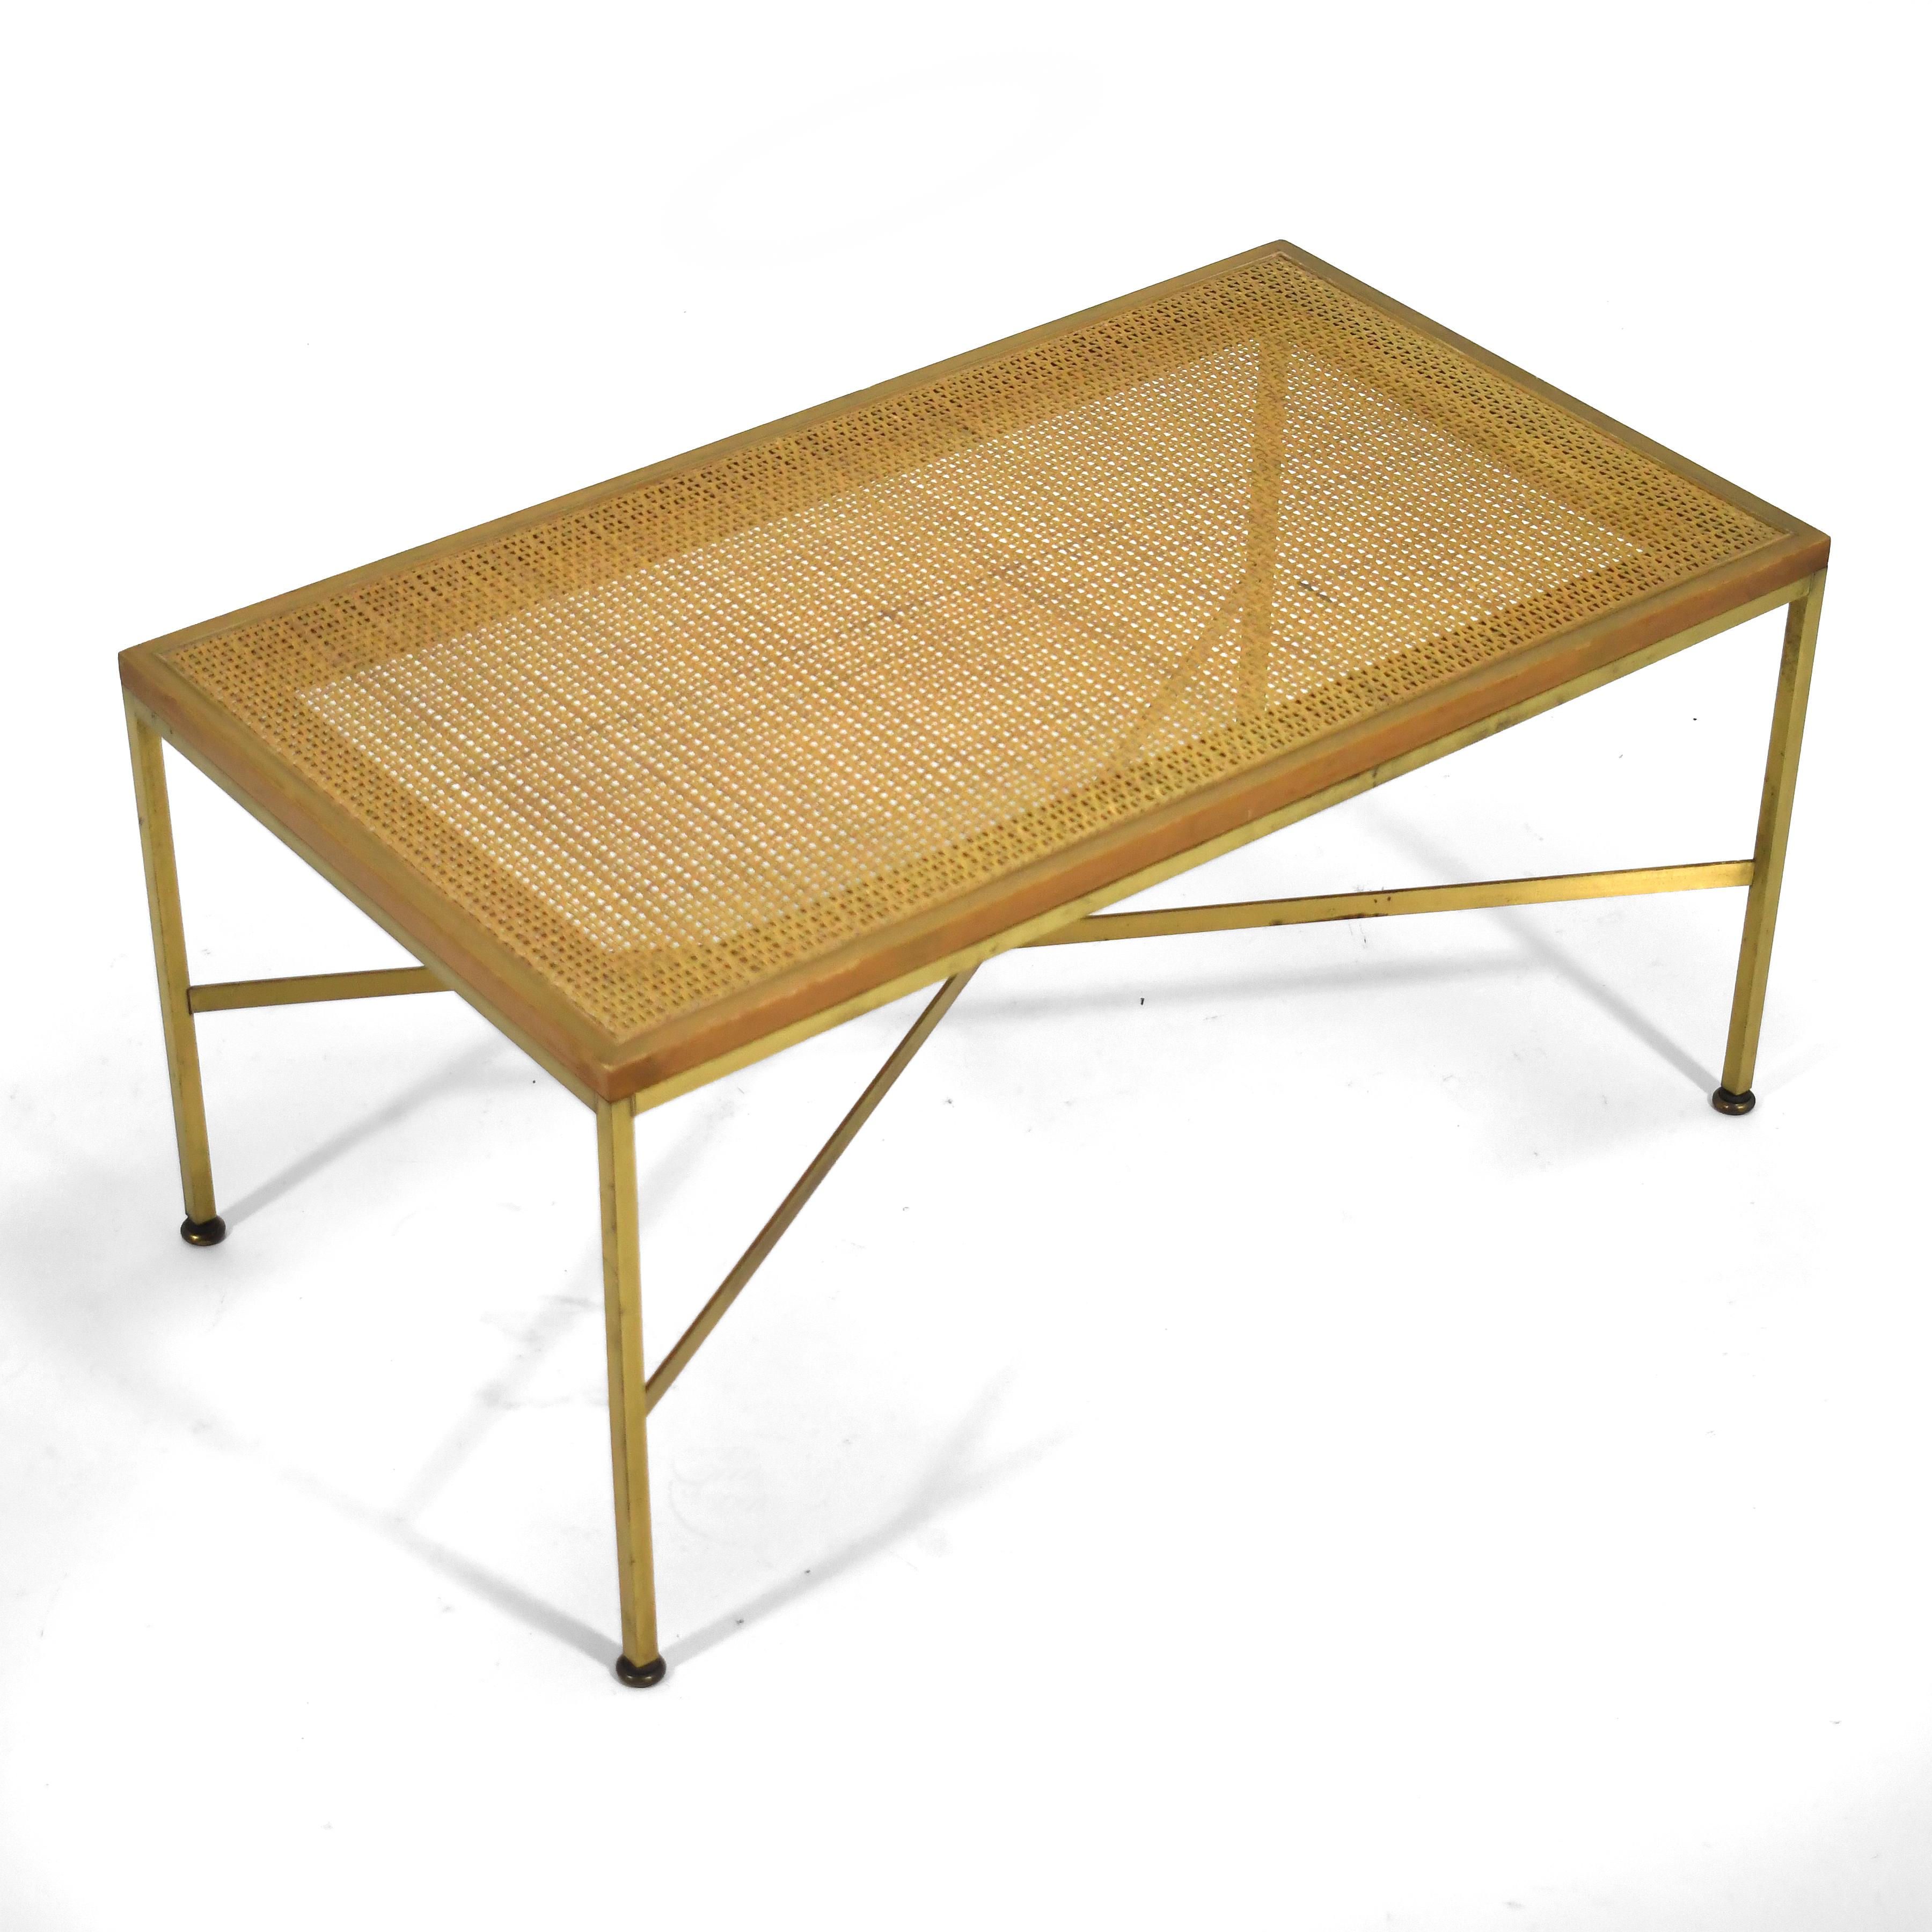 American Paul McCobb Brass & Cane Bench For Sale